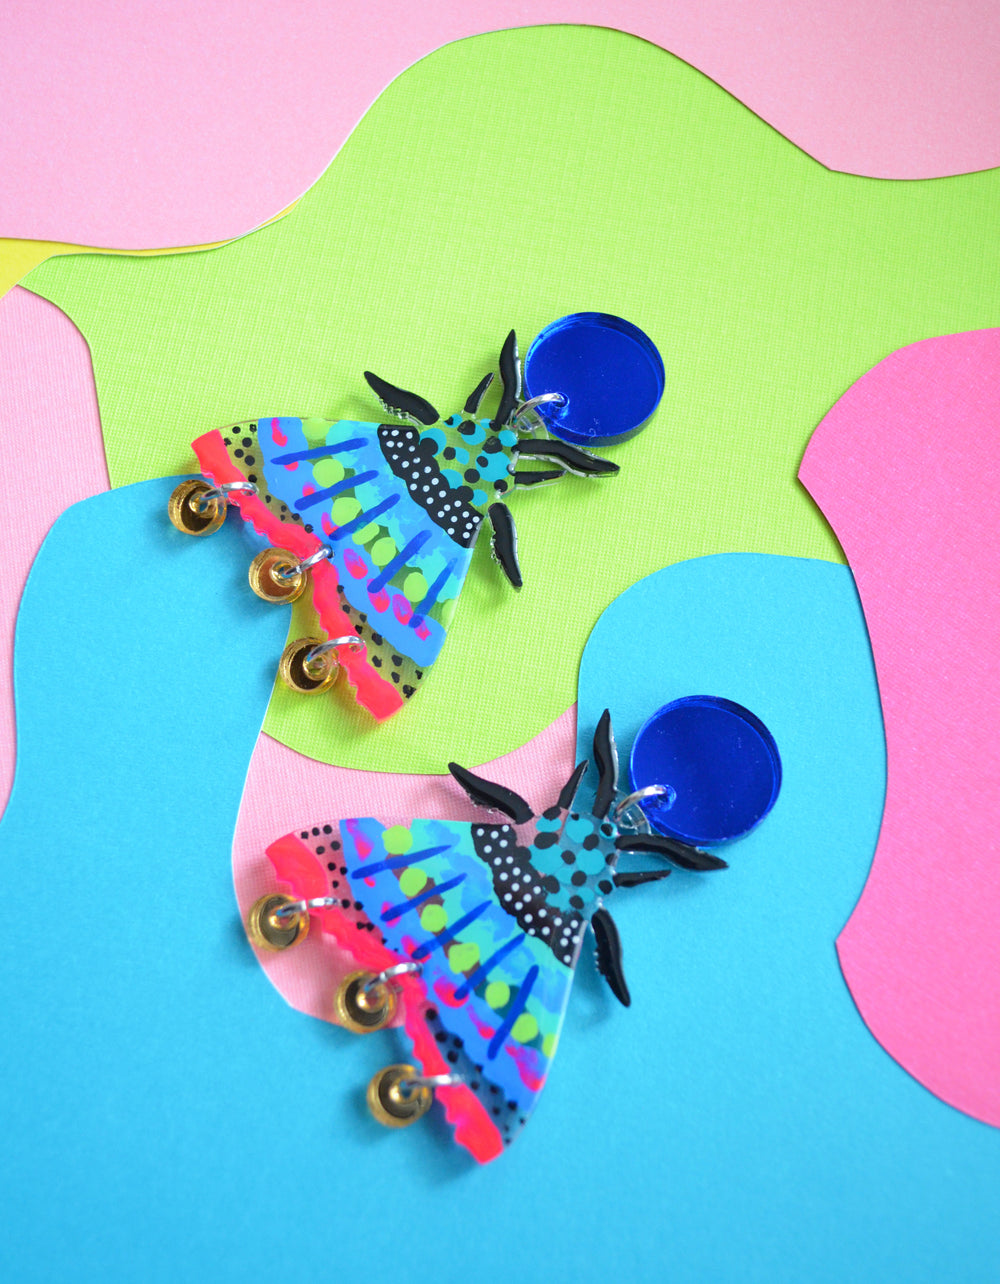 Moth Laser Cut Acrylic Earrings in Blue and Pink